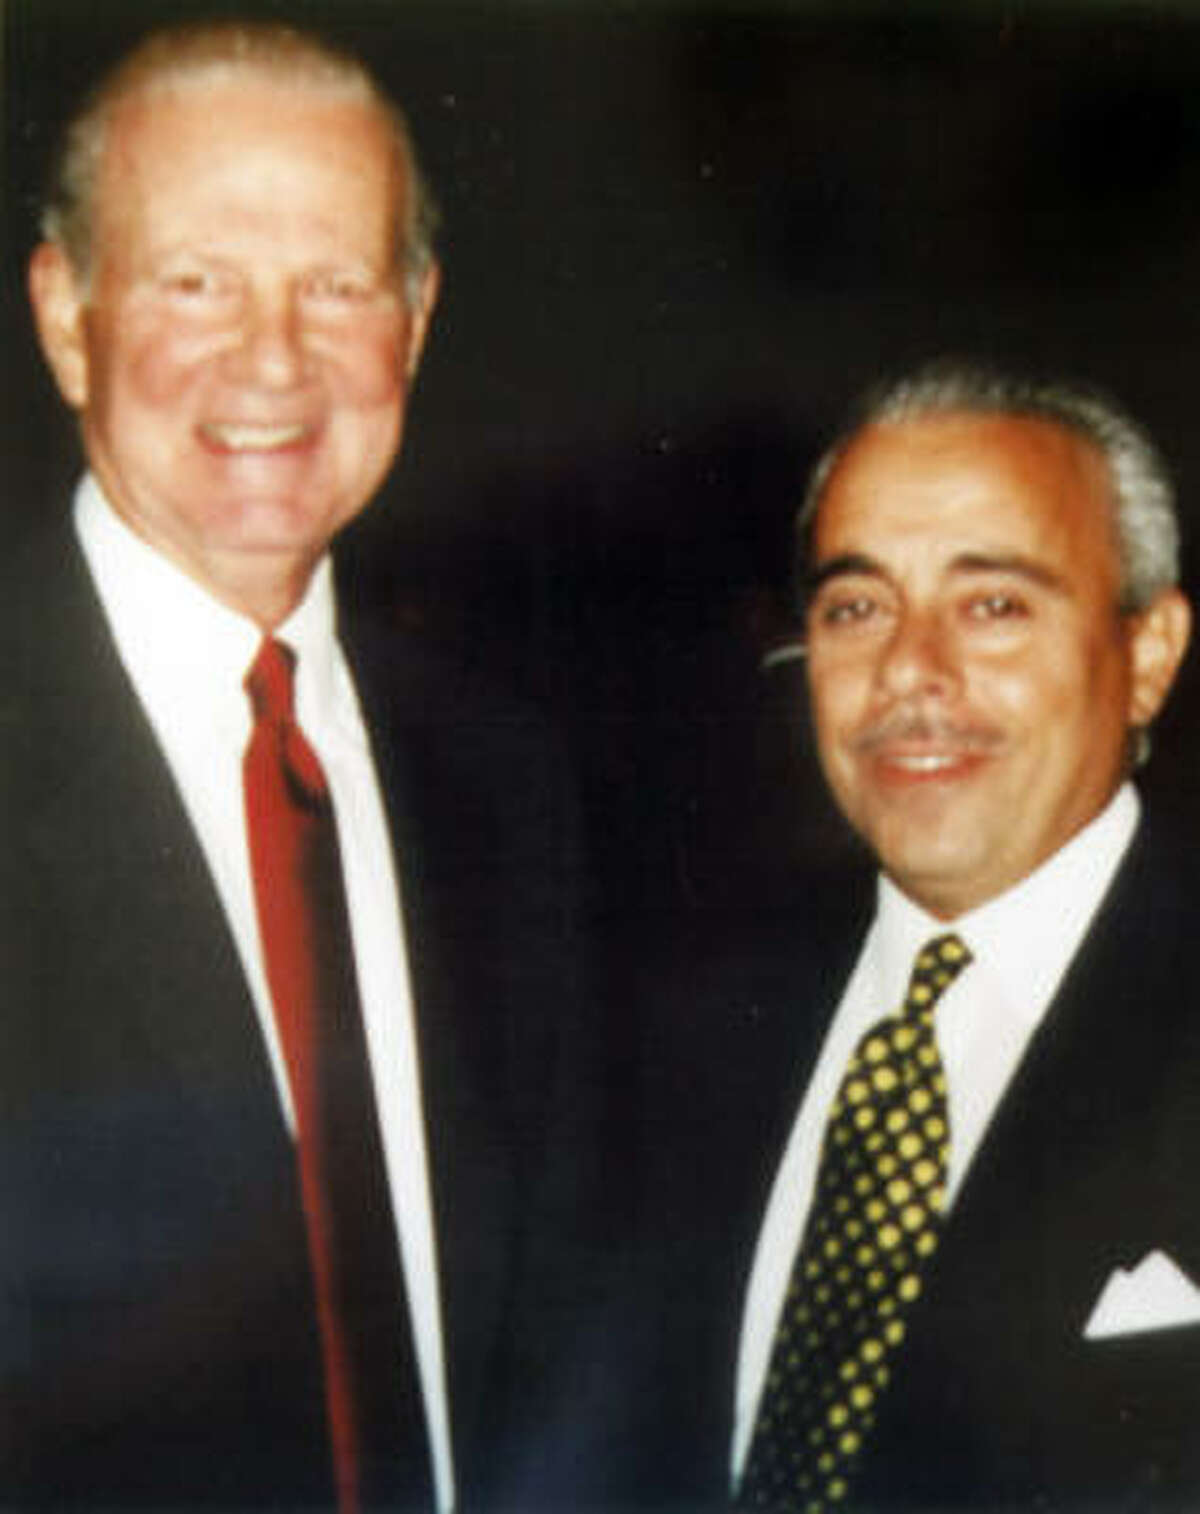 Vincent Carnaby, 52, is seen with former Secretary of State James Baker. Carnaby of Pearland held himself out as a federal intelligence agent but was sometimes reluctant to talk about his precise job and employer. At times he mentioned the Central Intelligence Agency or the Department of Homeland Security. He was the president of the local chapter of the Association for Intelligence Officers.